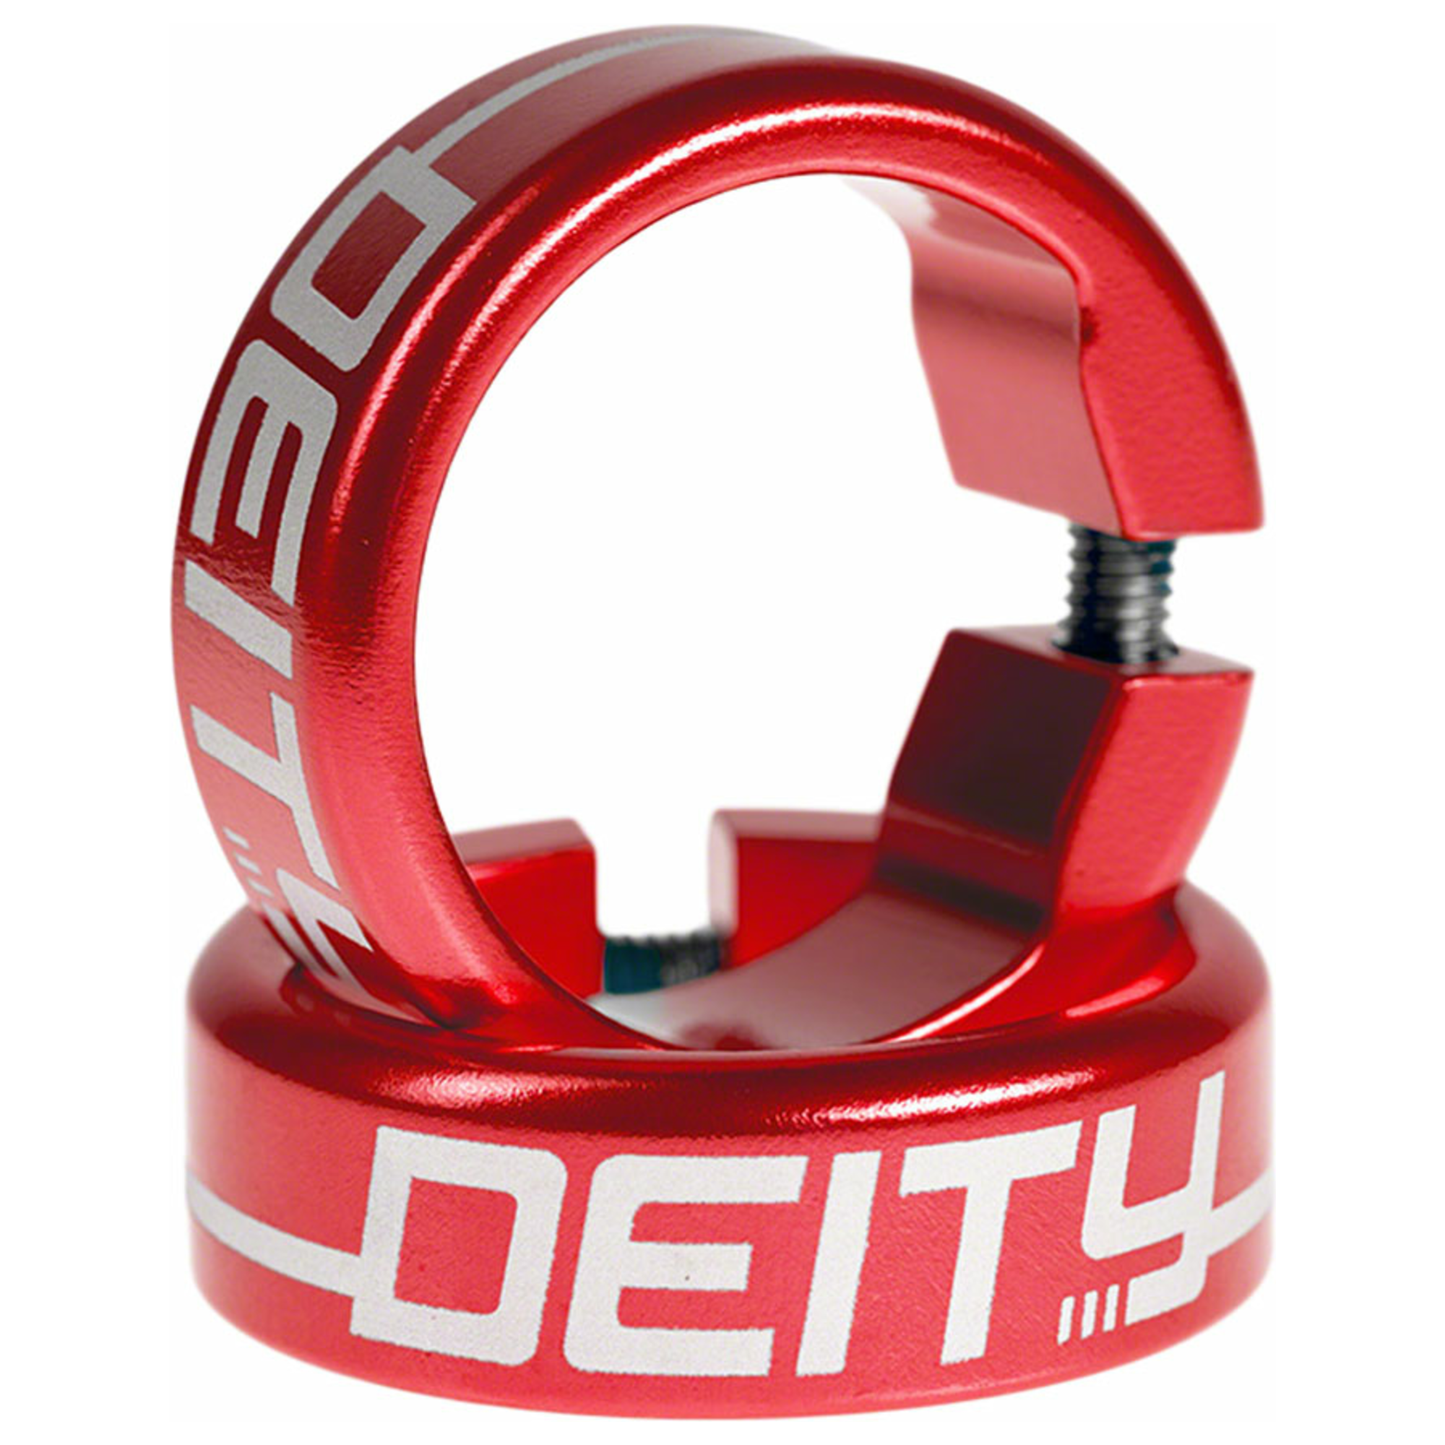 Deity Grip Clamps - Grip Clamps - Red